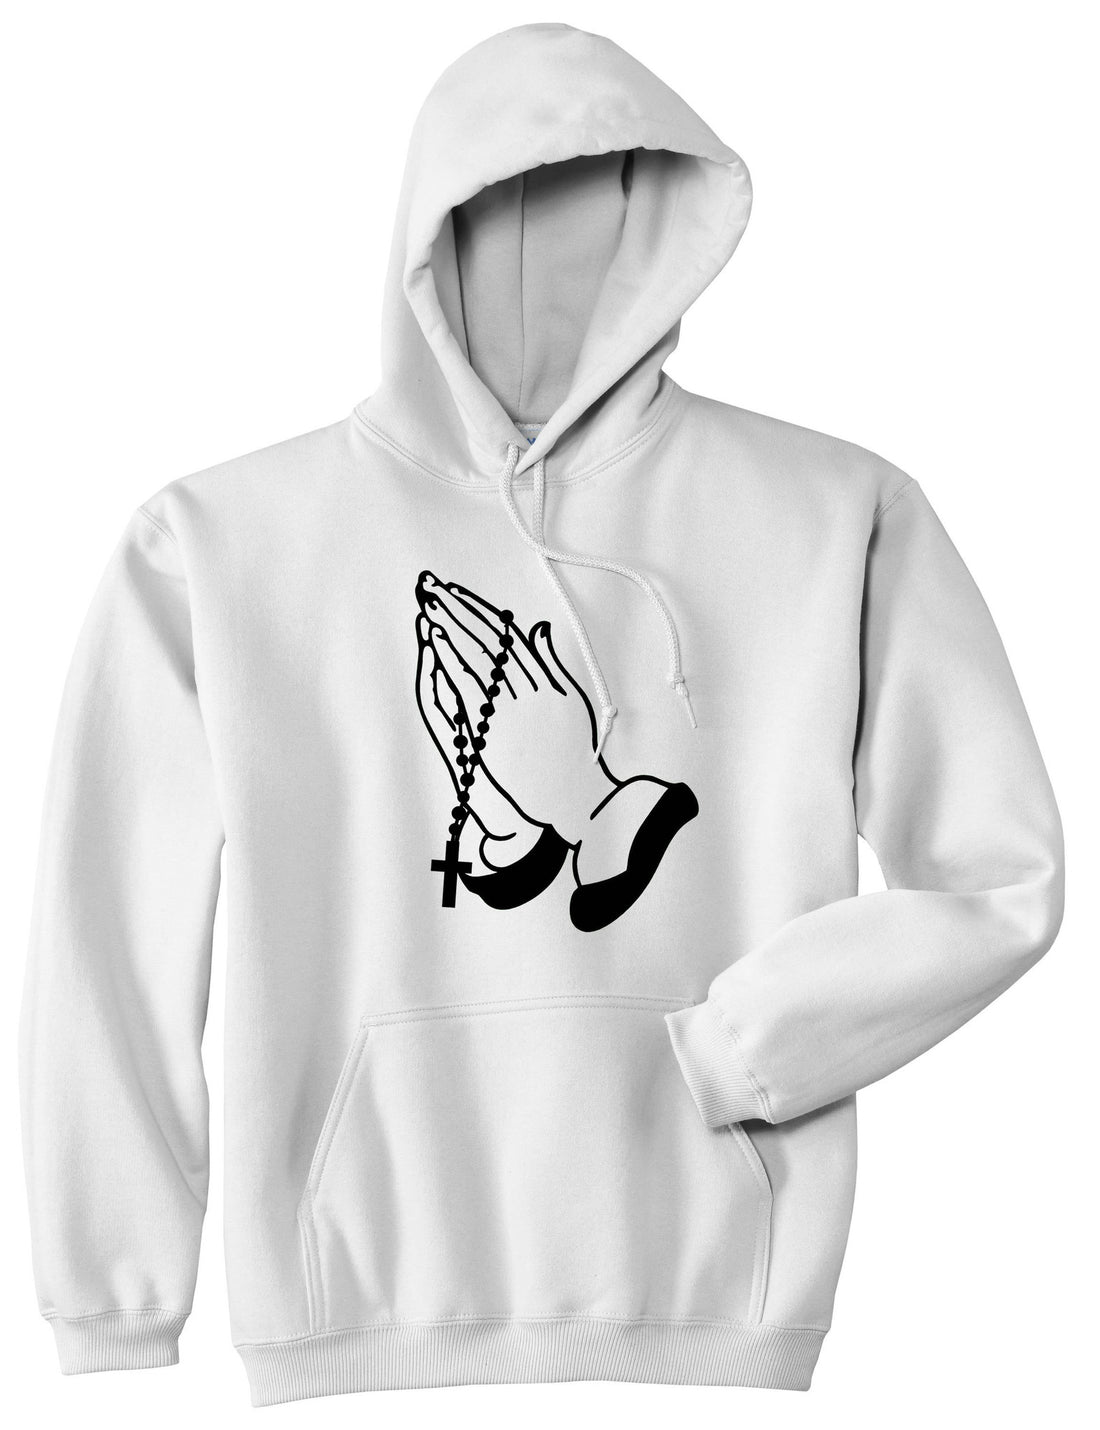 Pray For Them Prayer Hands Rosary Pullover Hoodie Hoody in White